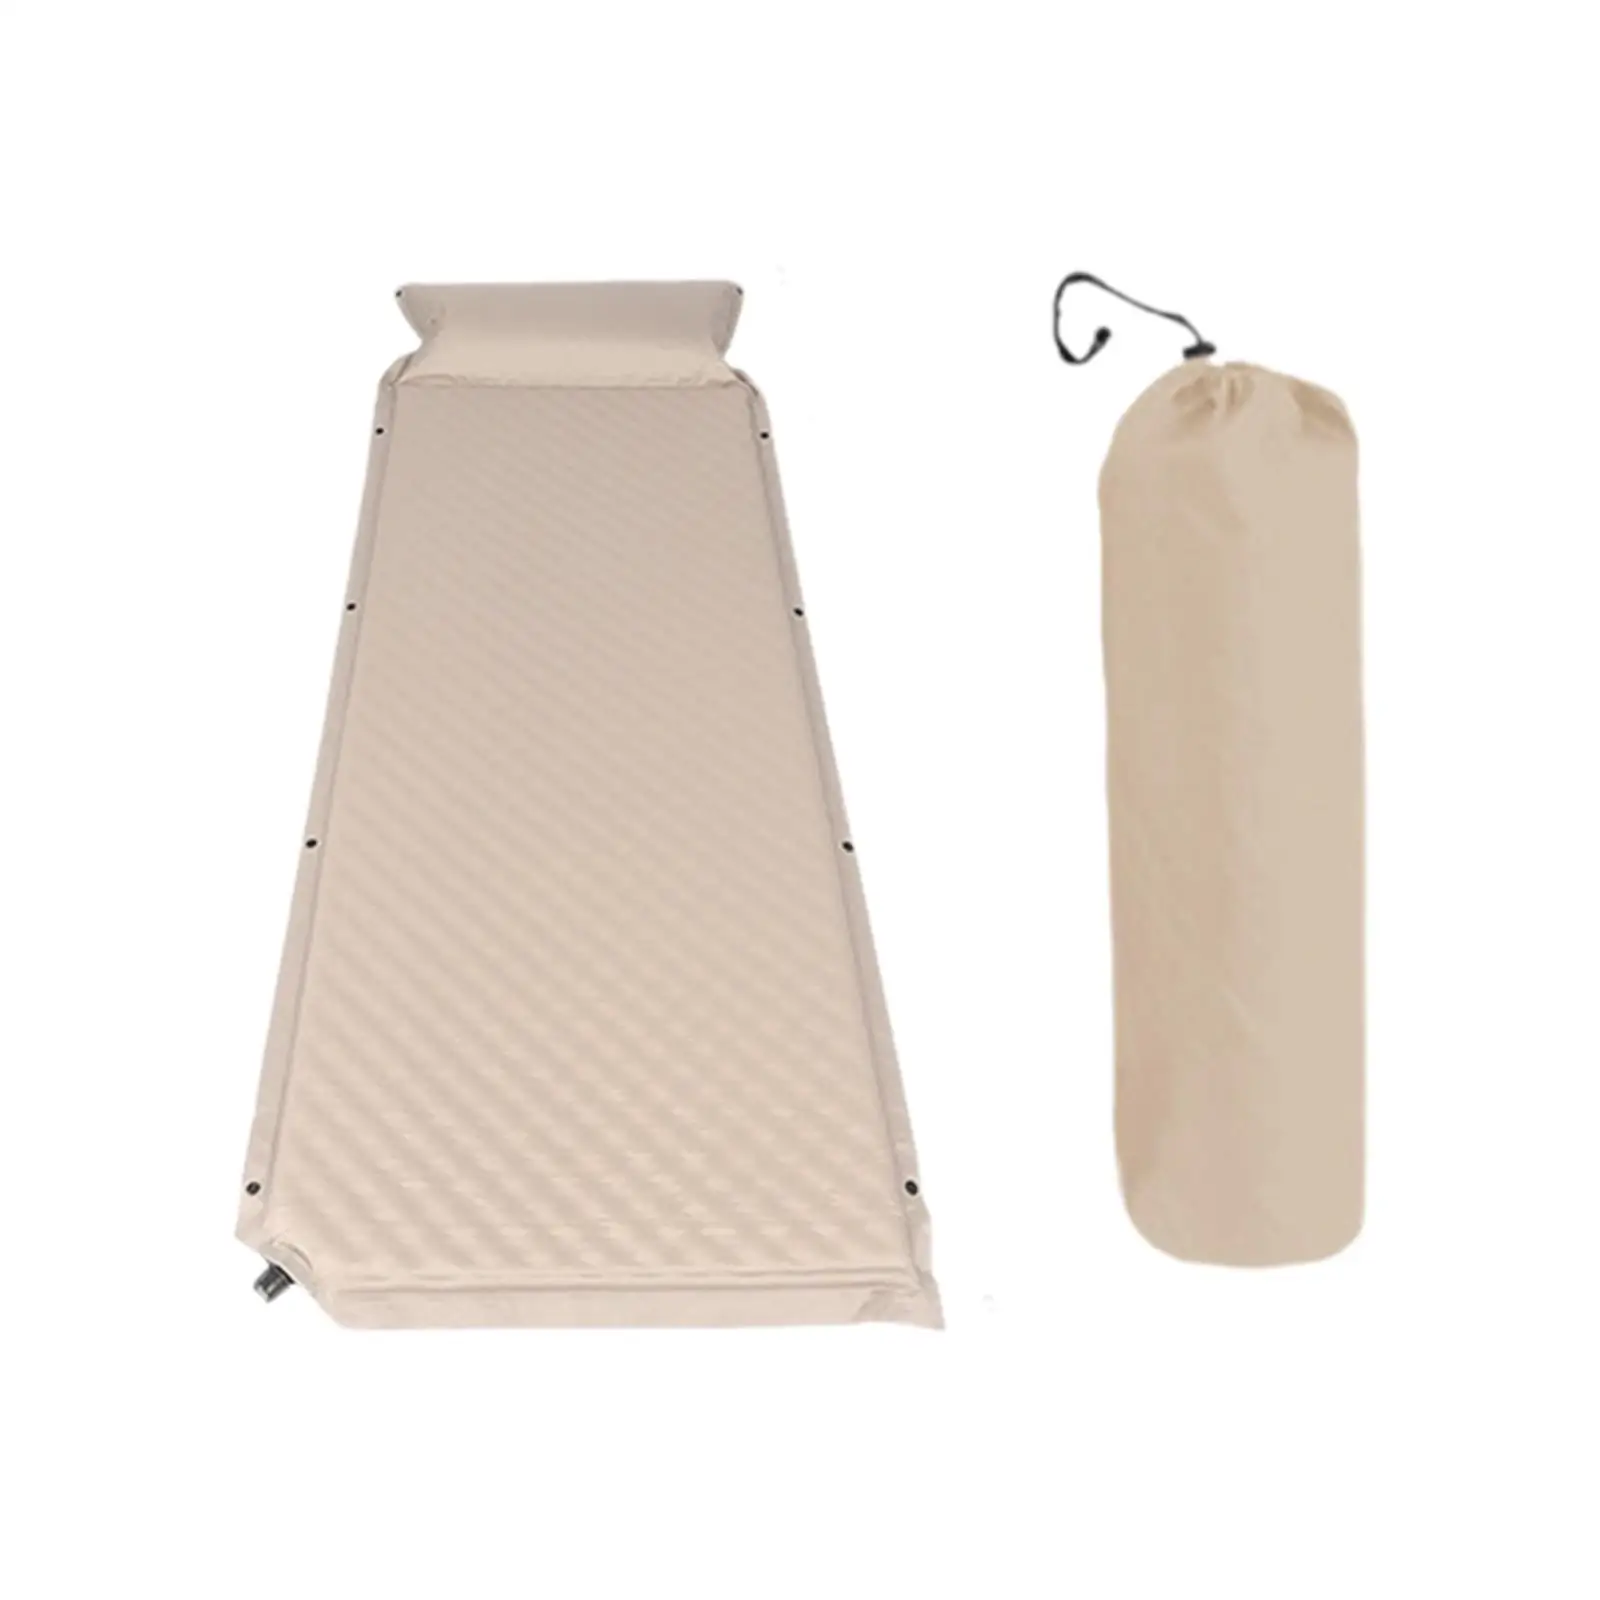 Automatic Inflatable Mattress Camping Sleeping Pad with Pillow for Tent